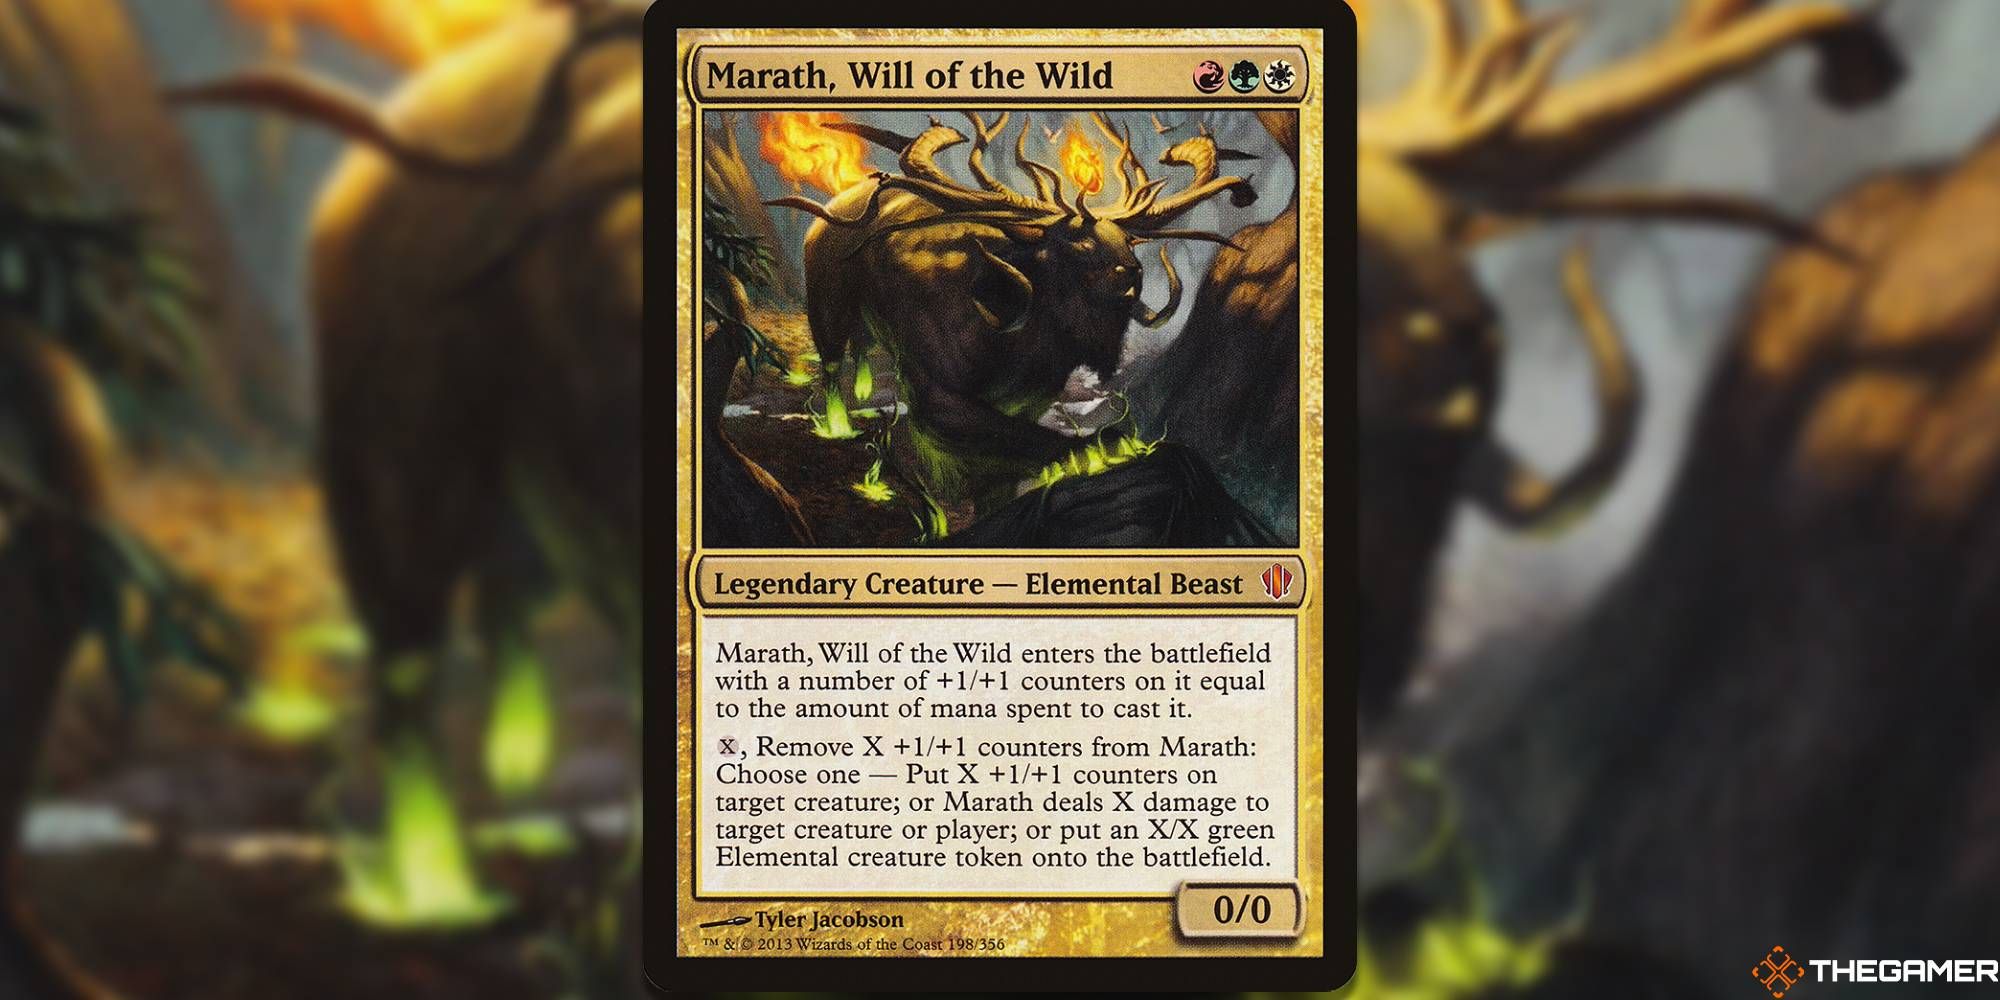 Image of the Marath, Will of the Wild card from Magic: The Gathering with art by Tyler Jacobson